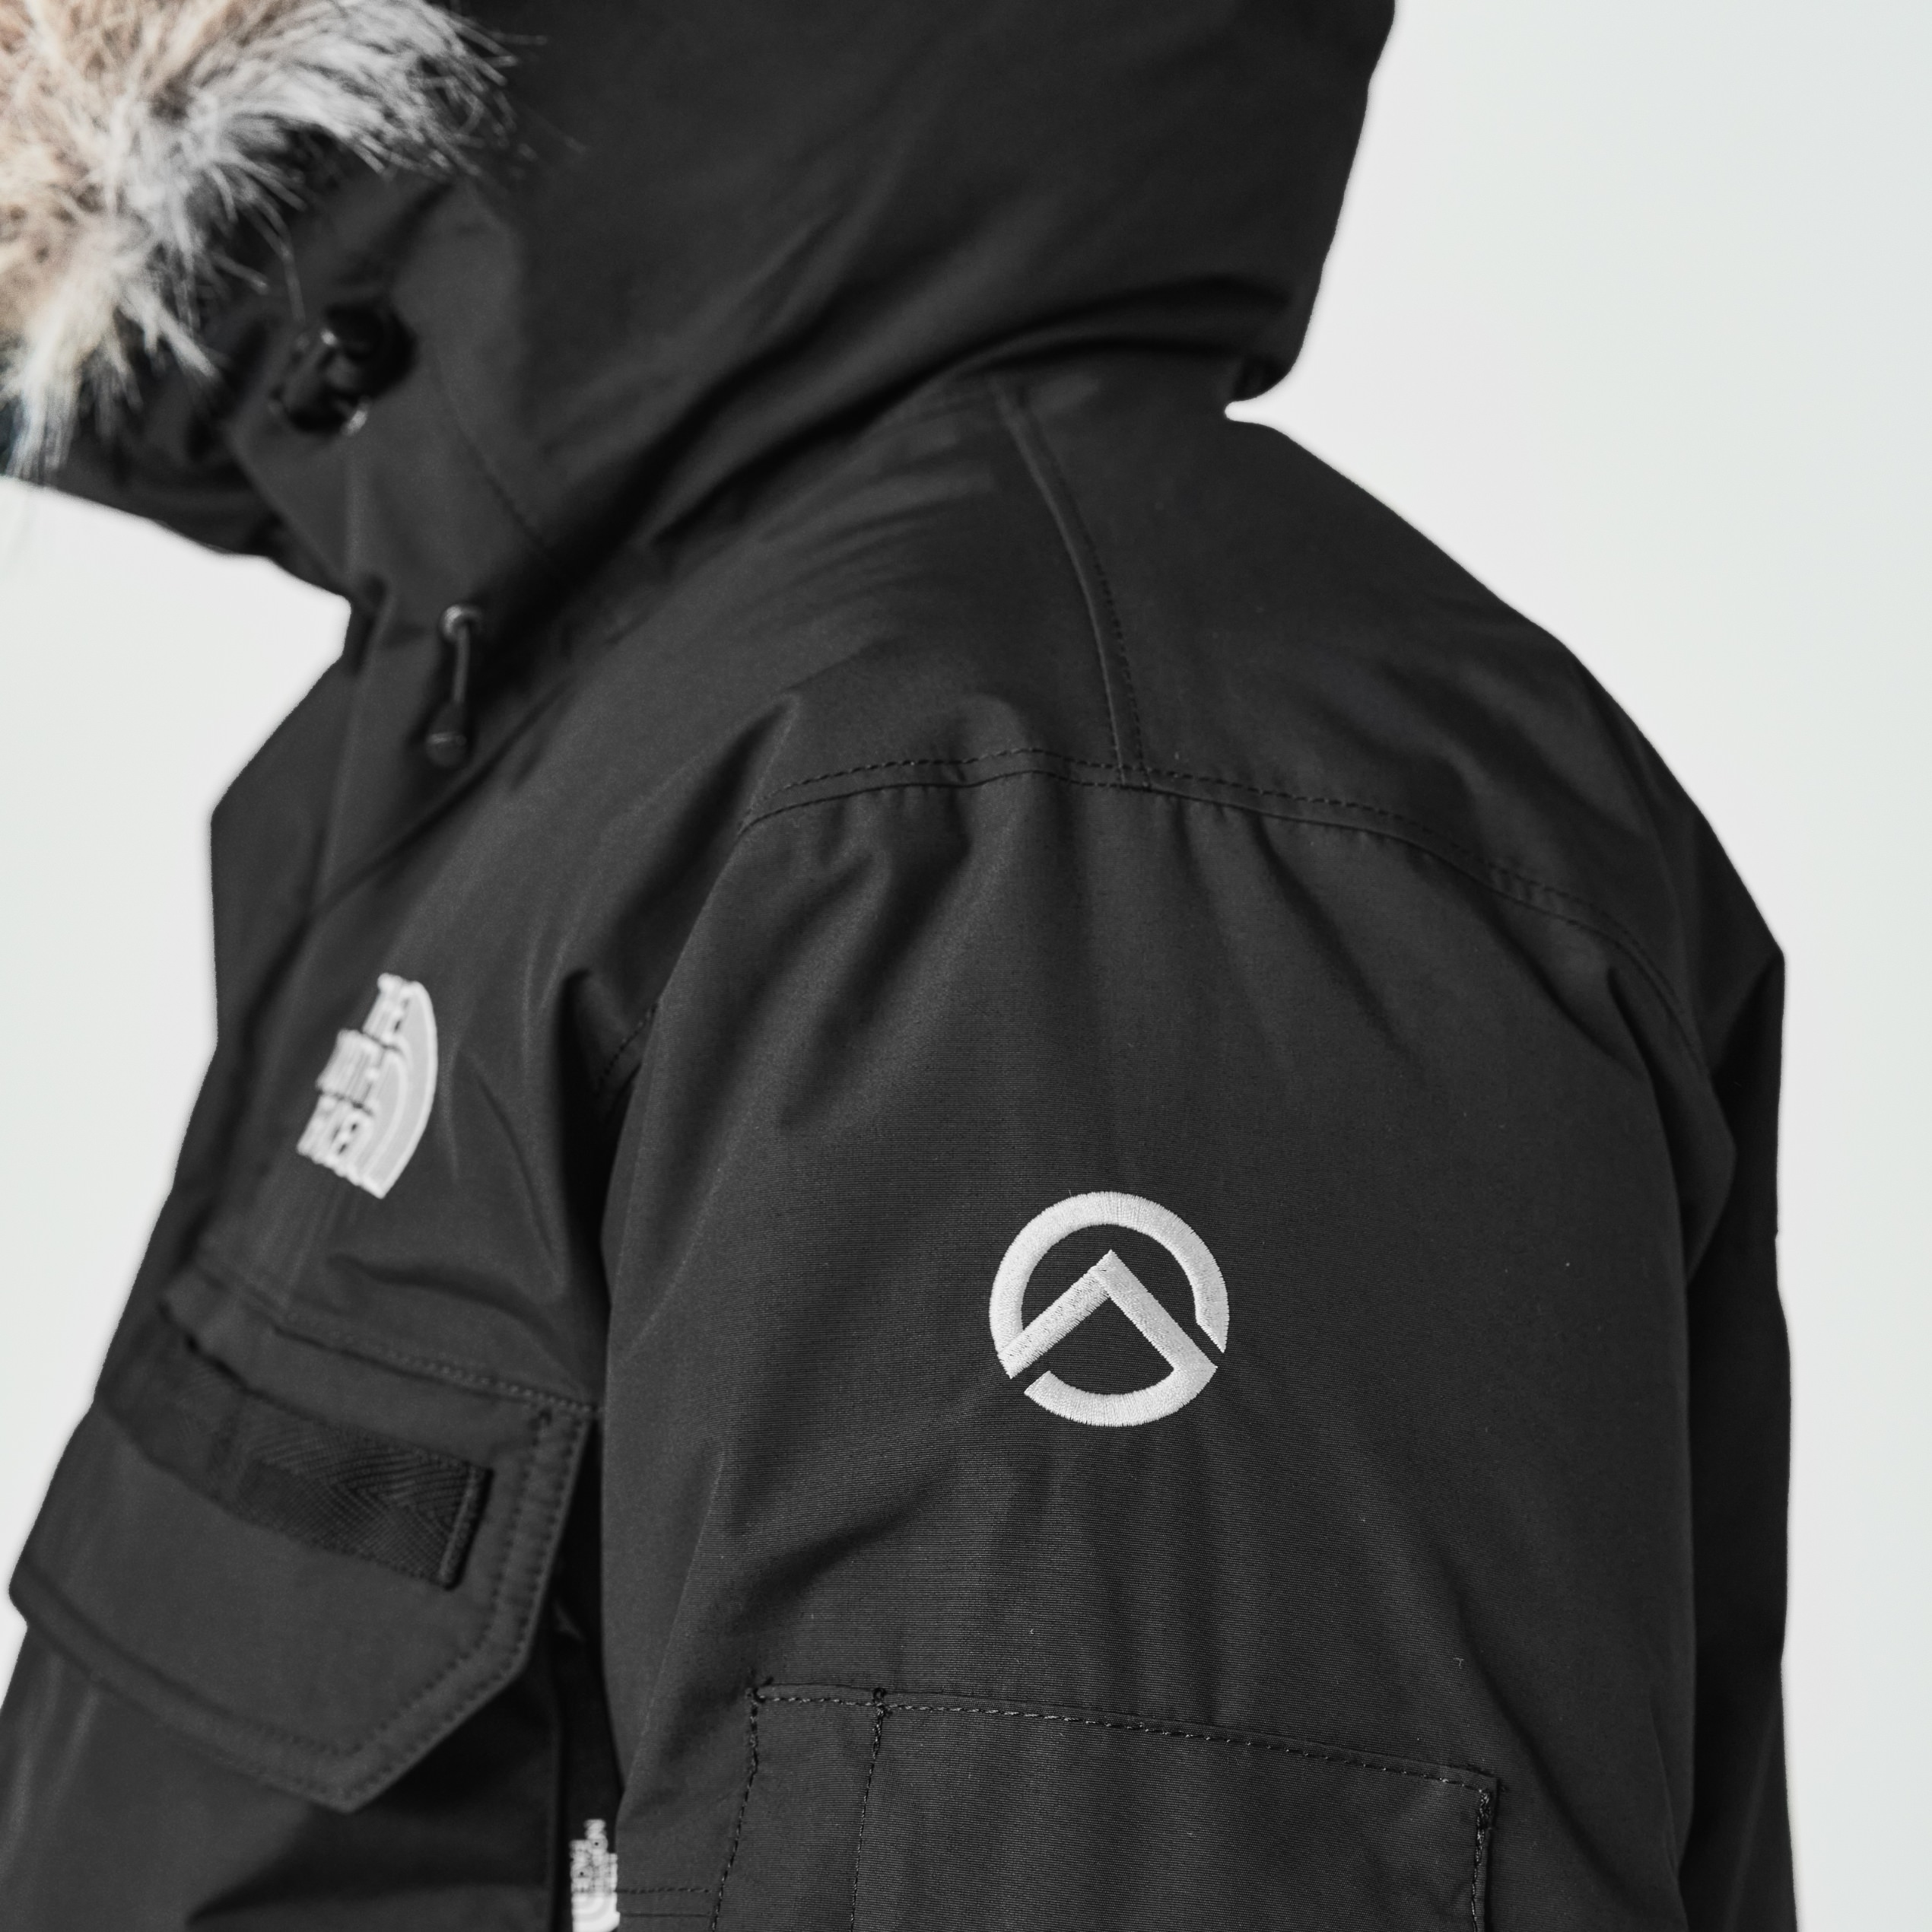 SOUTHERN CROSS PARKA - THE NORTH FACE MOUNTAIN